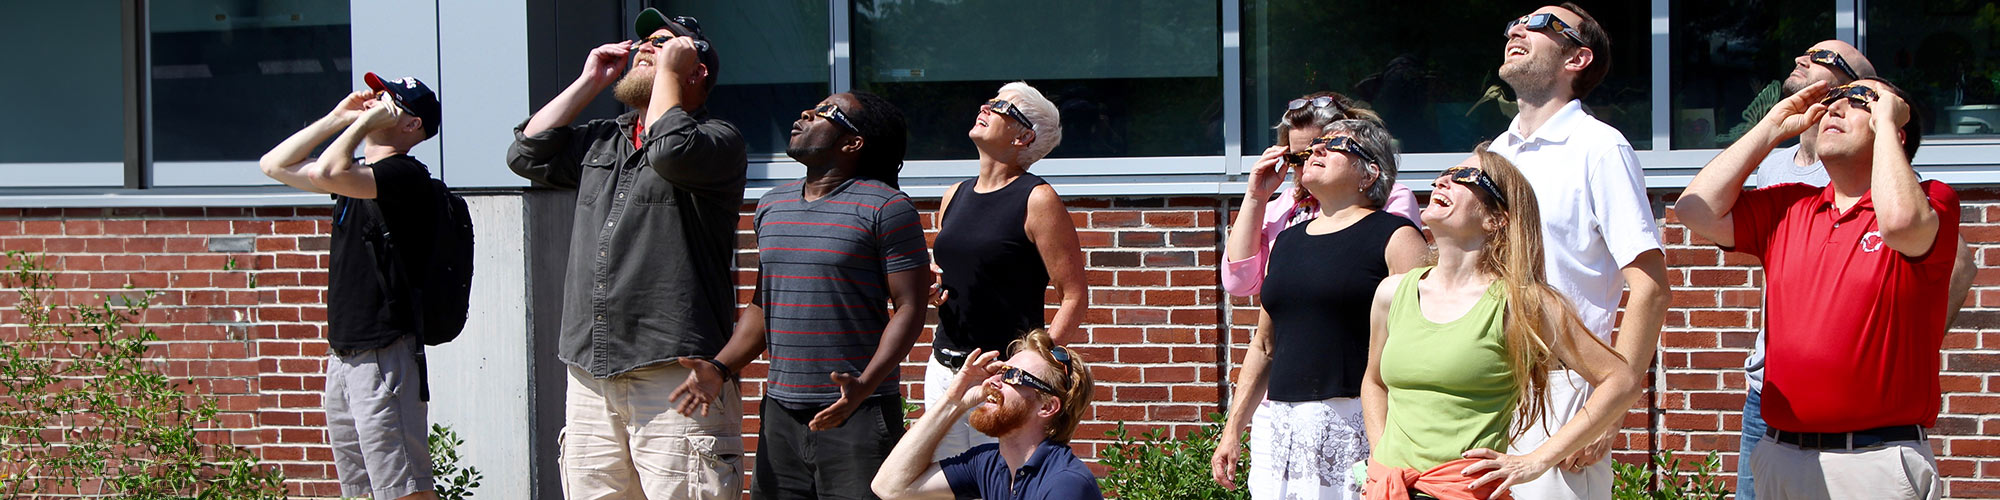 Crowd of people wearing safety glasses, gather to watch the solar eclipse in 2017.